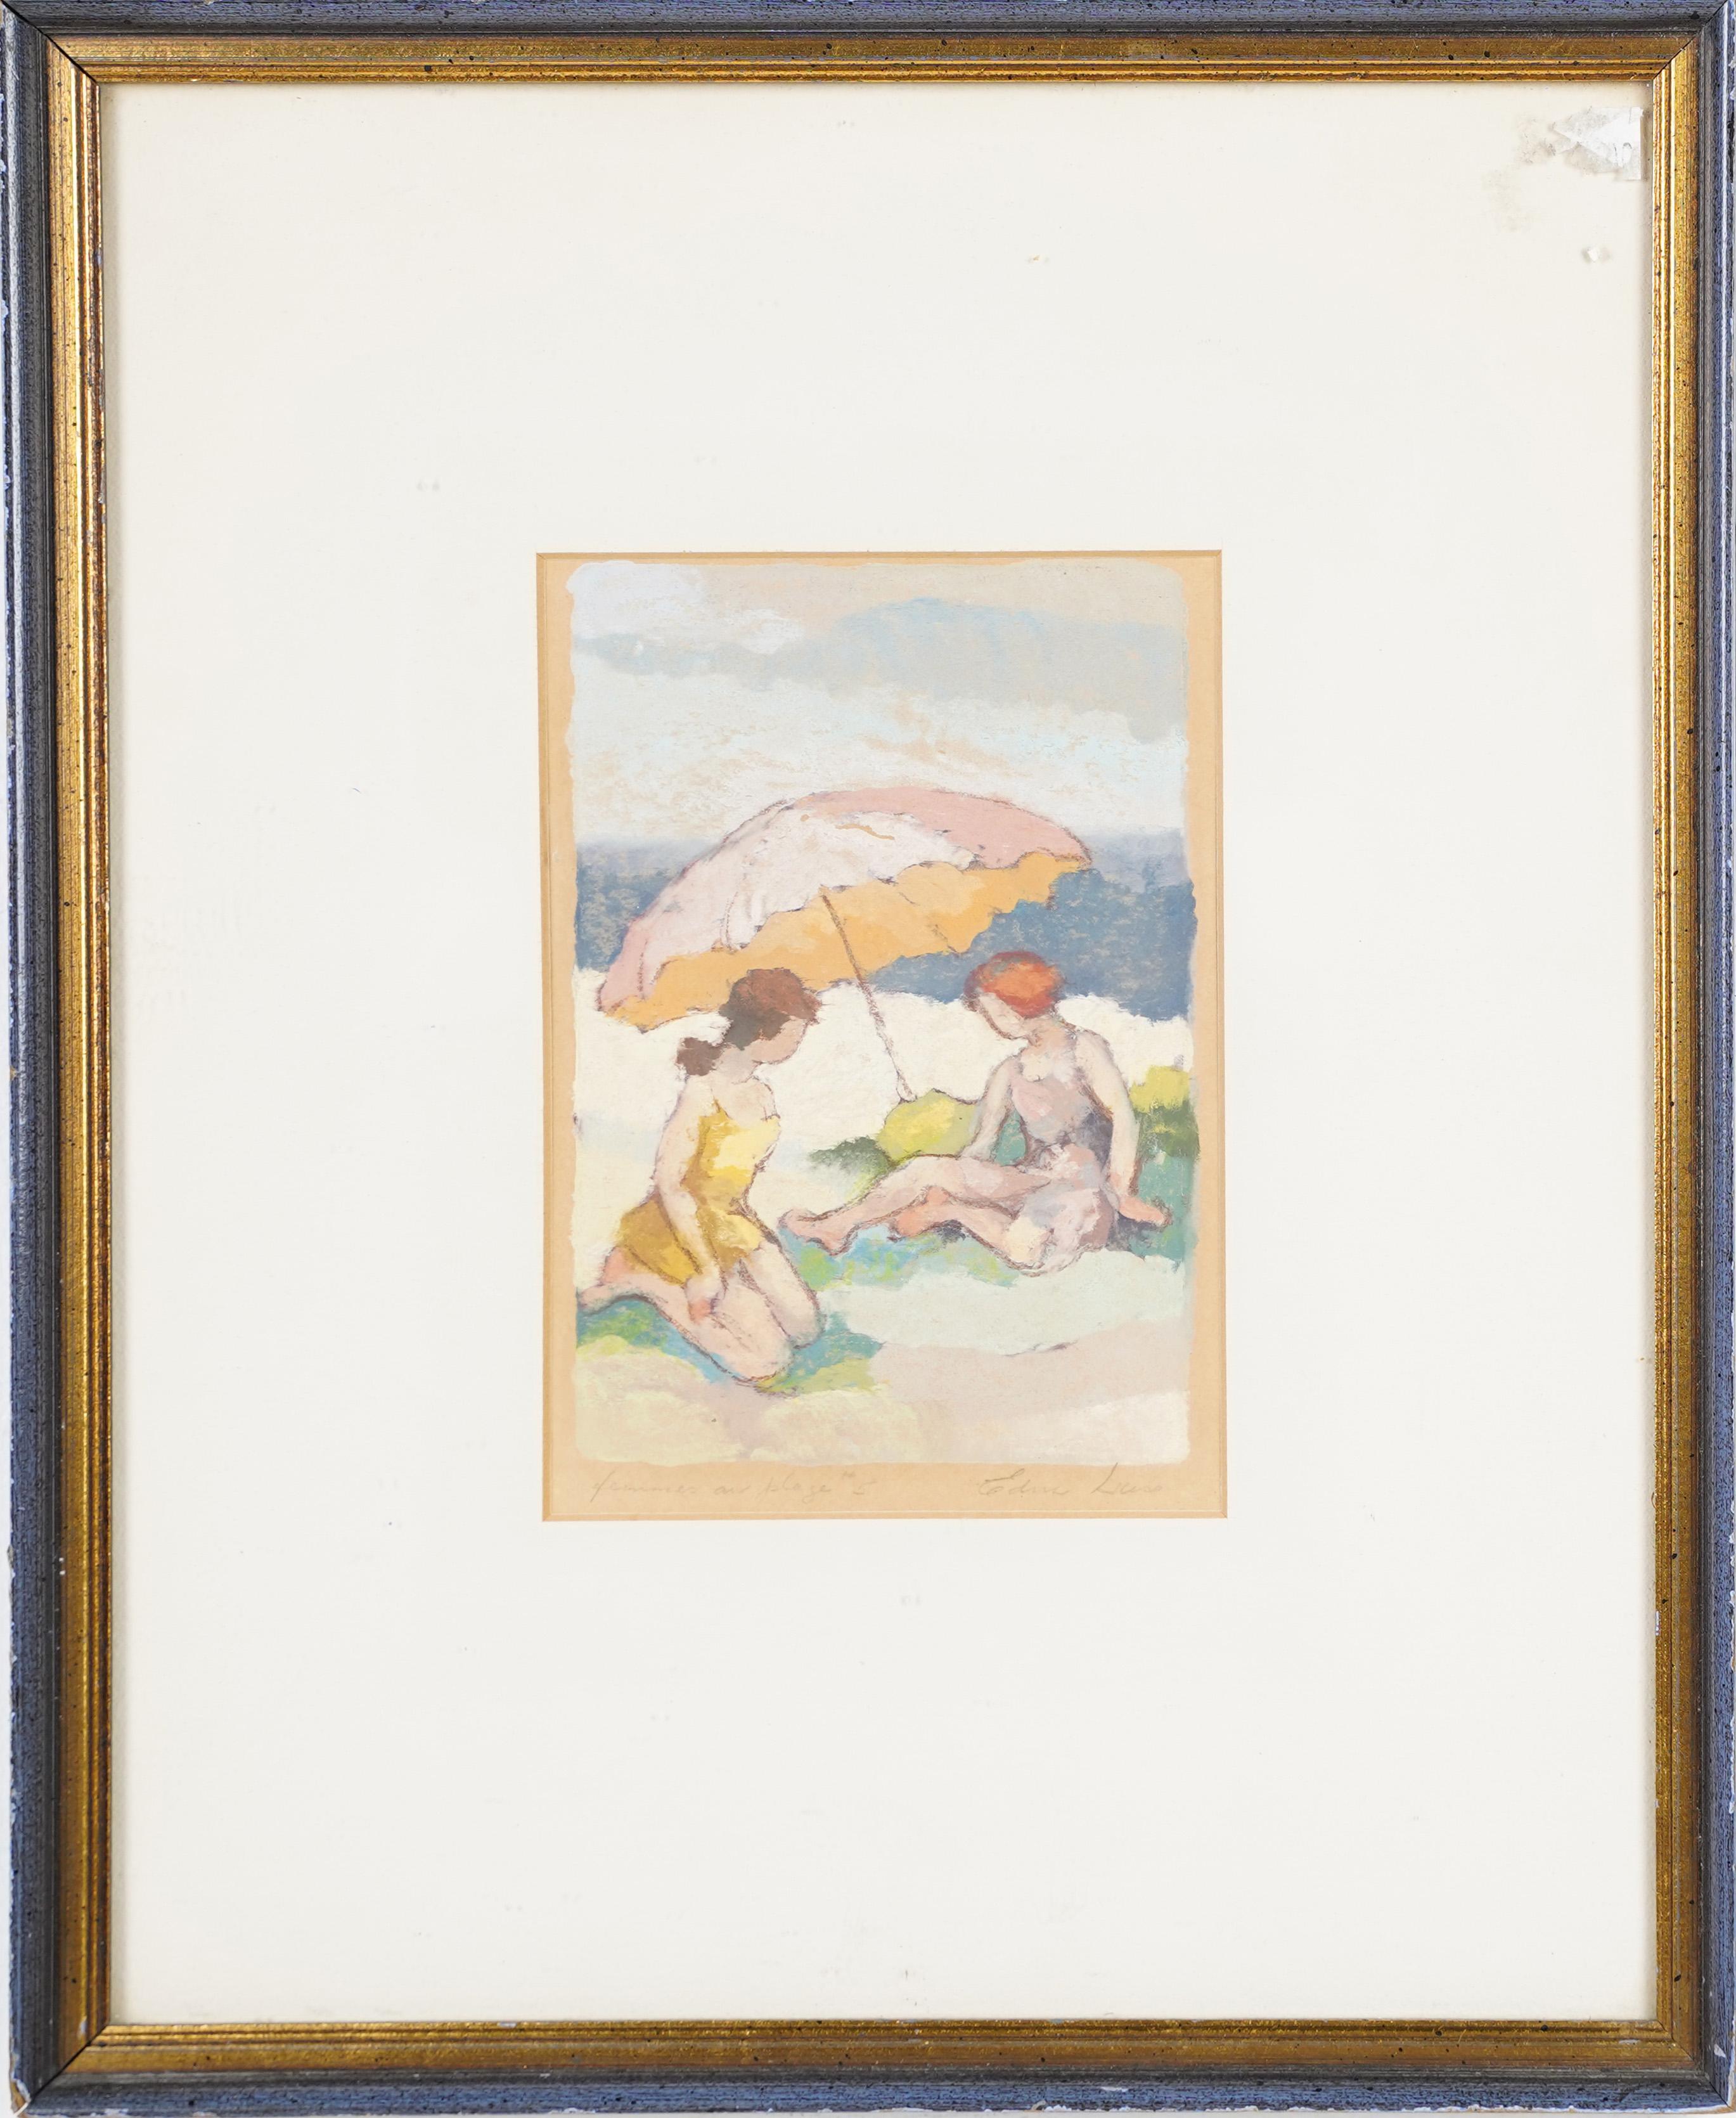 Antique French impressionist signed beach scene.  Gouache and oil on paper.  Signed.  Framed.  Image size, 4.5L x 6.5H.